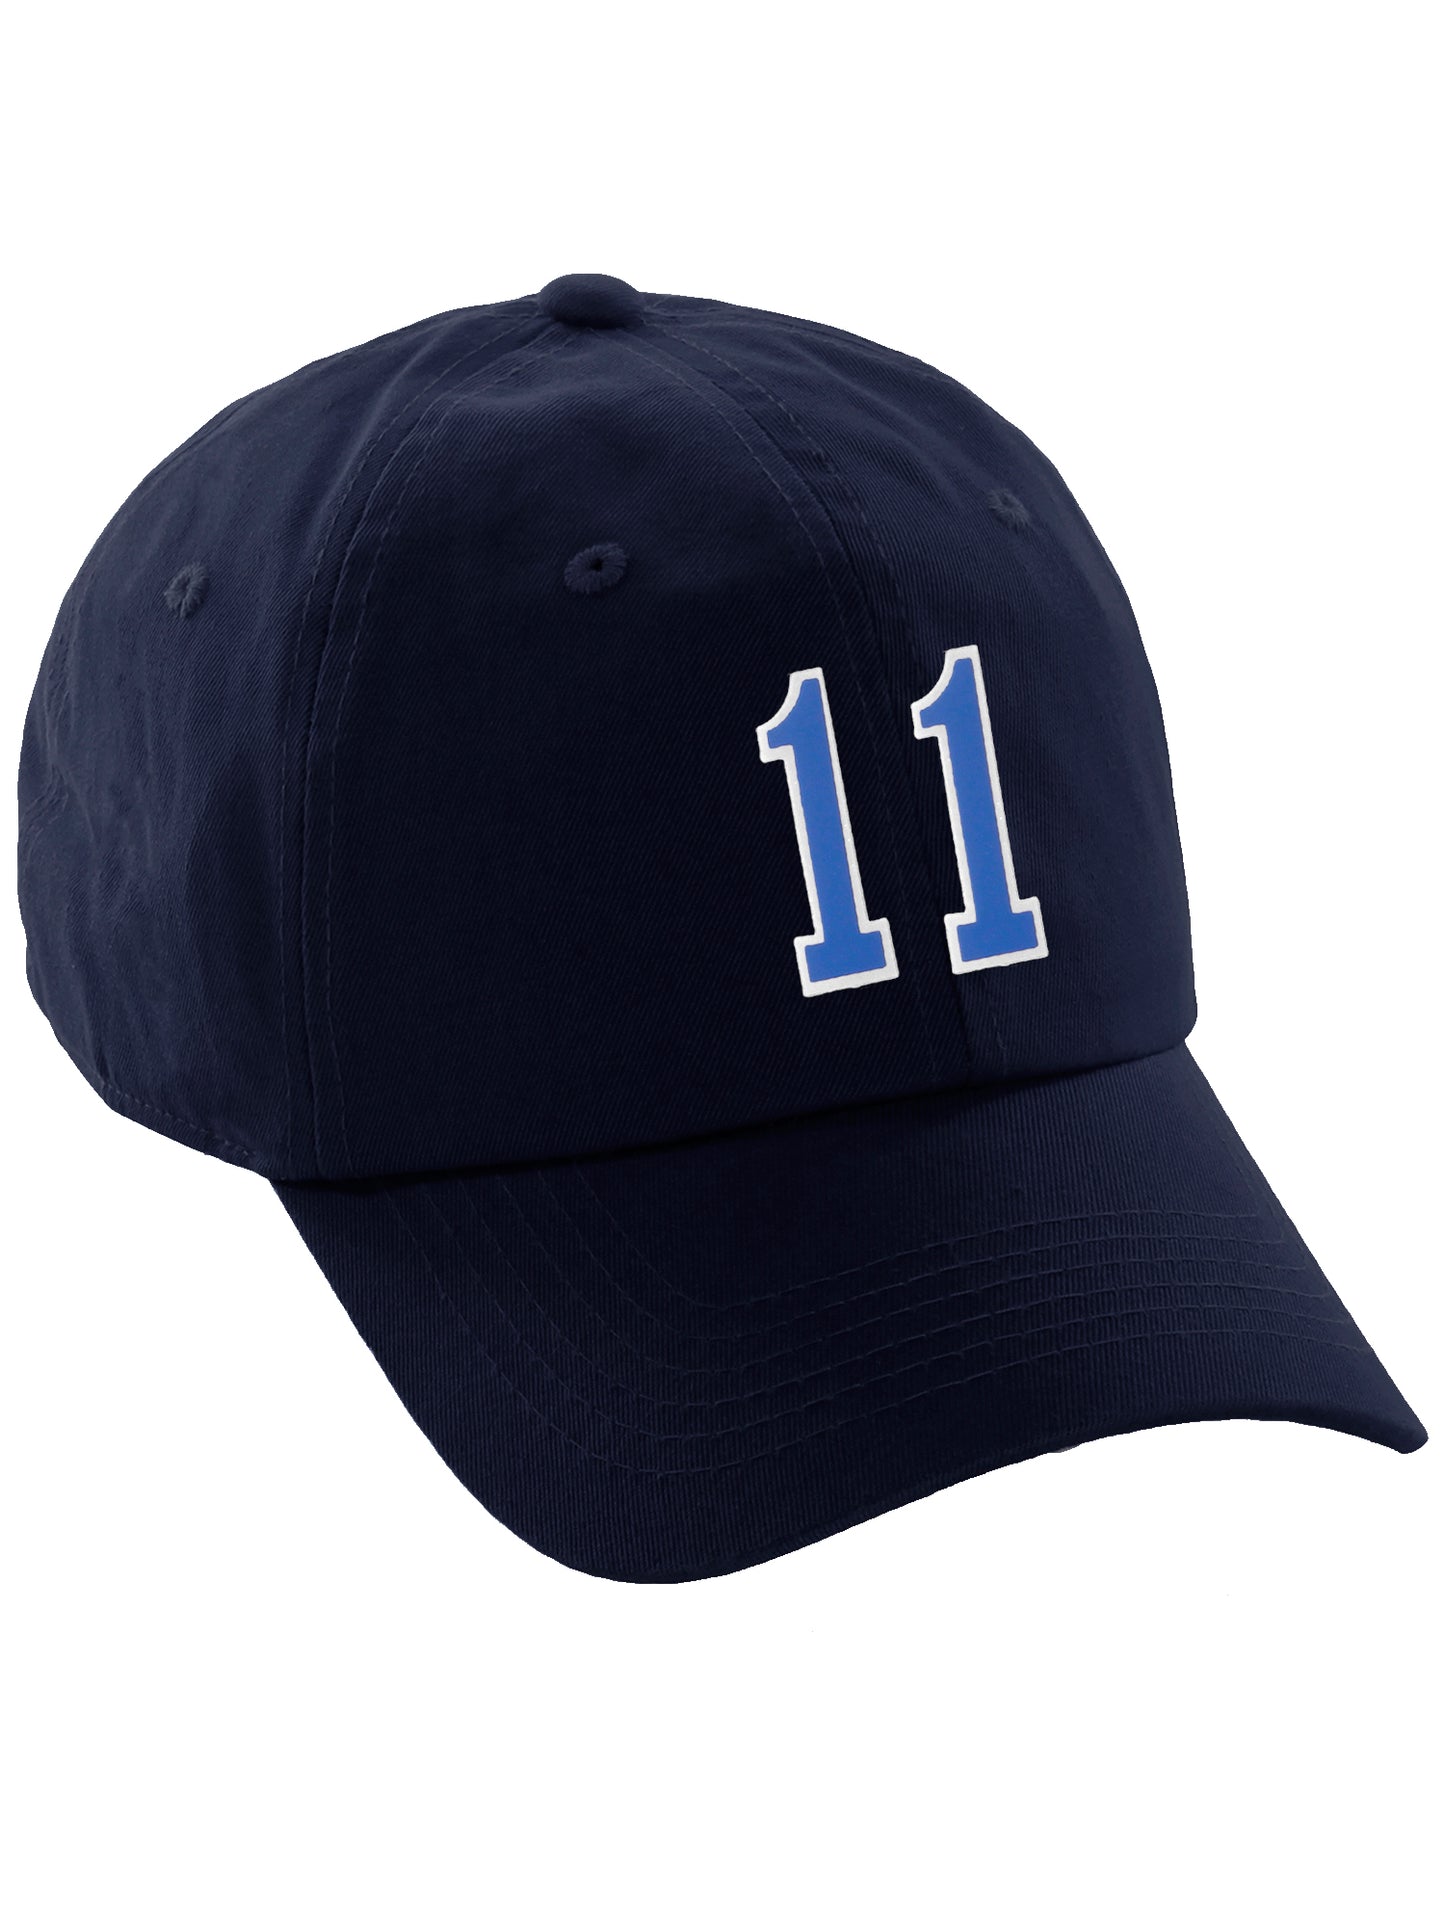 I&W Hatgear Customized Number Hat 00 to 99 Team Colors Baseball Cap, Navy Hat White Blue